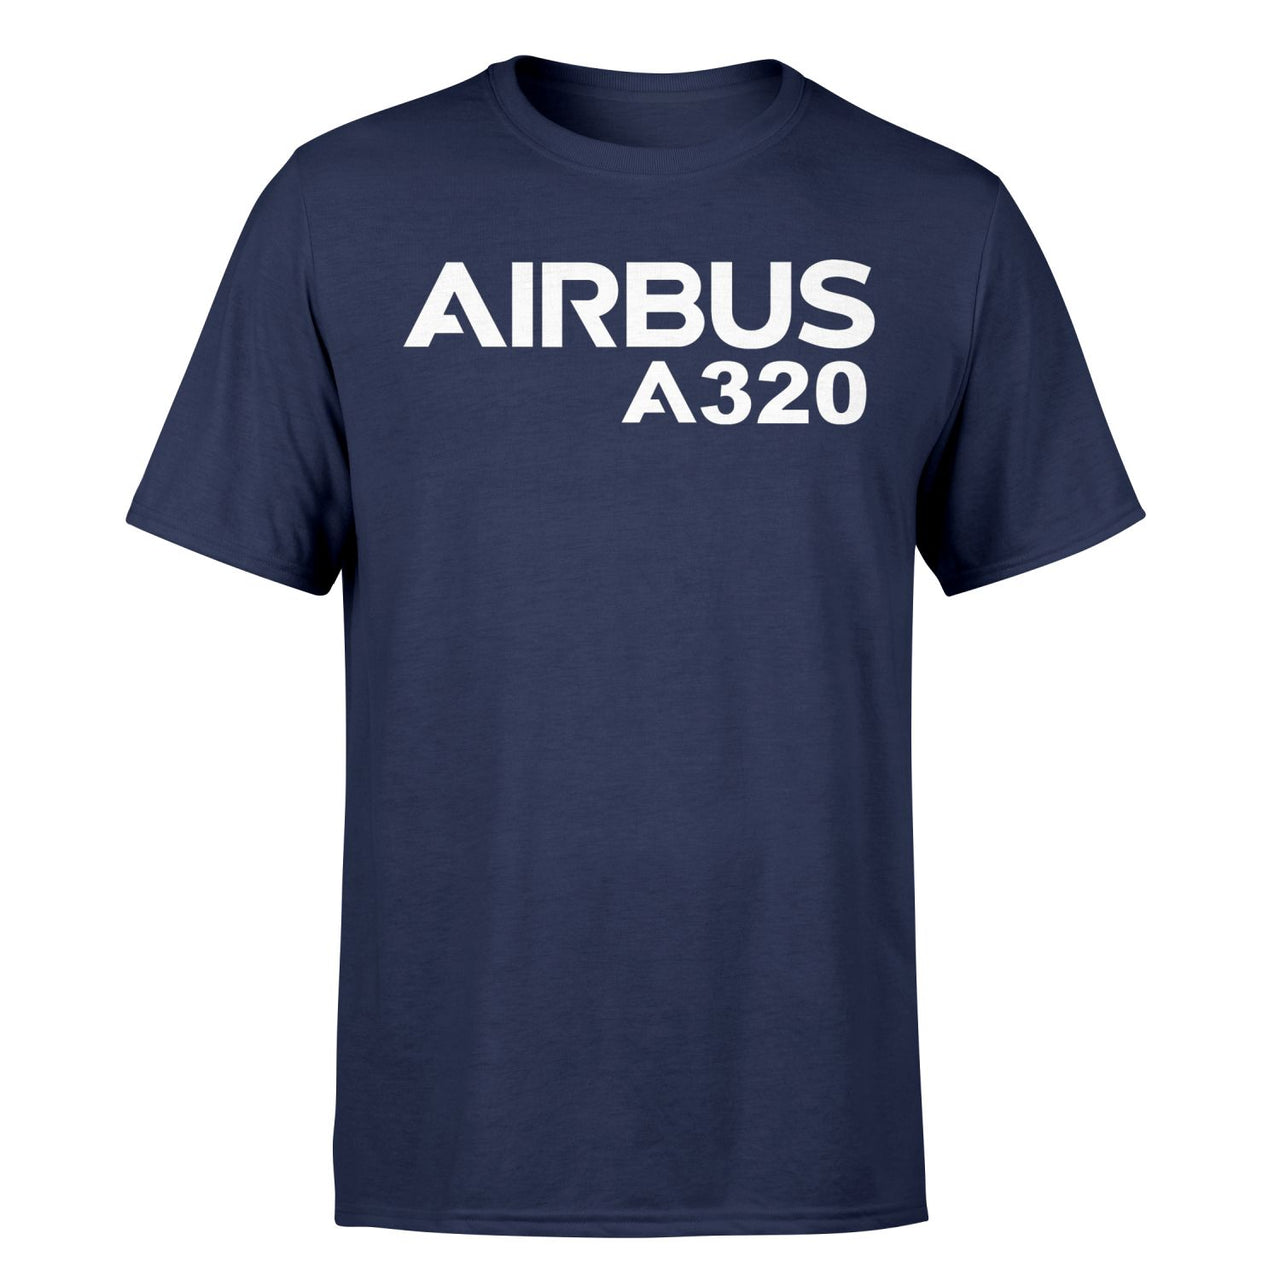 Airbus A320 & Text Designed T-Shirts